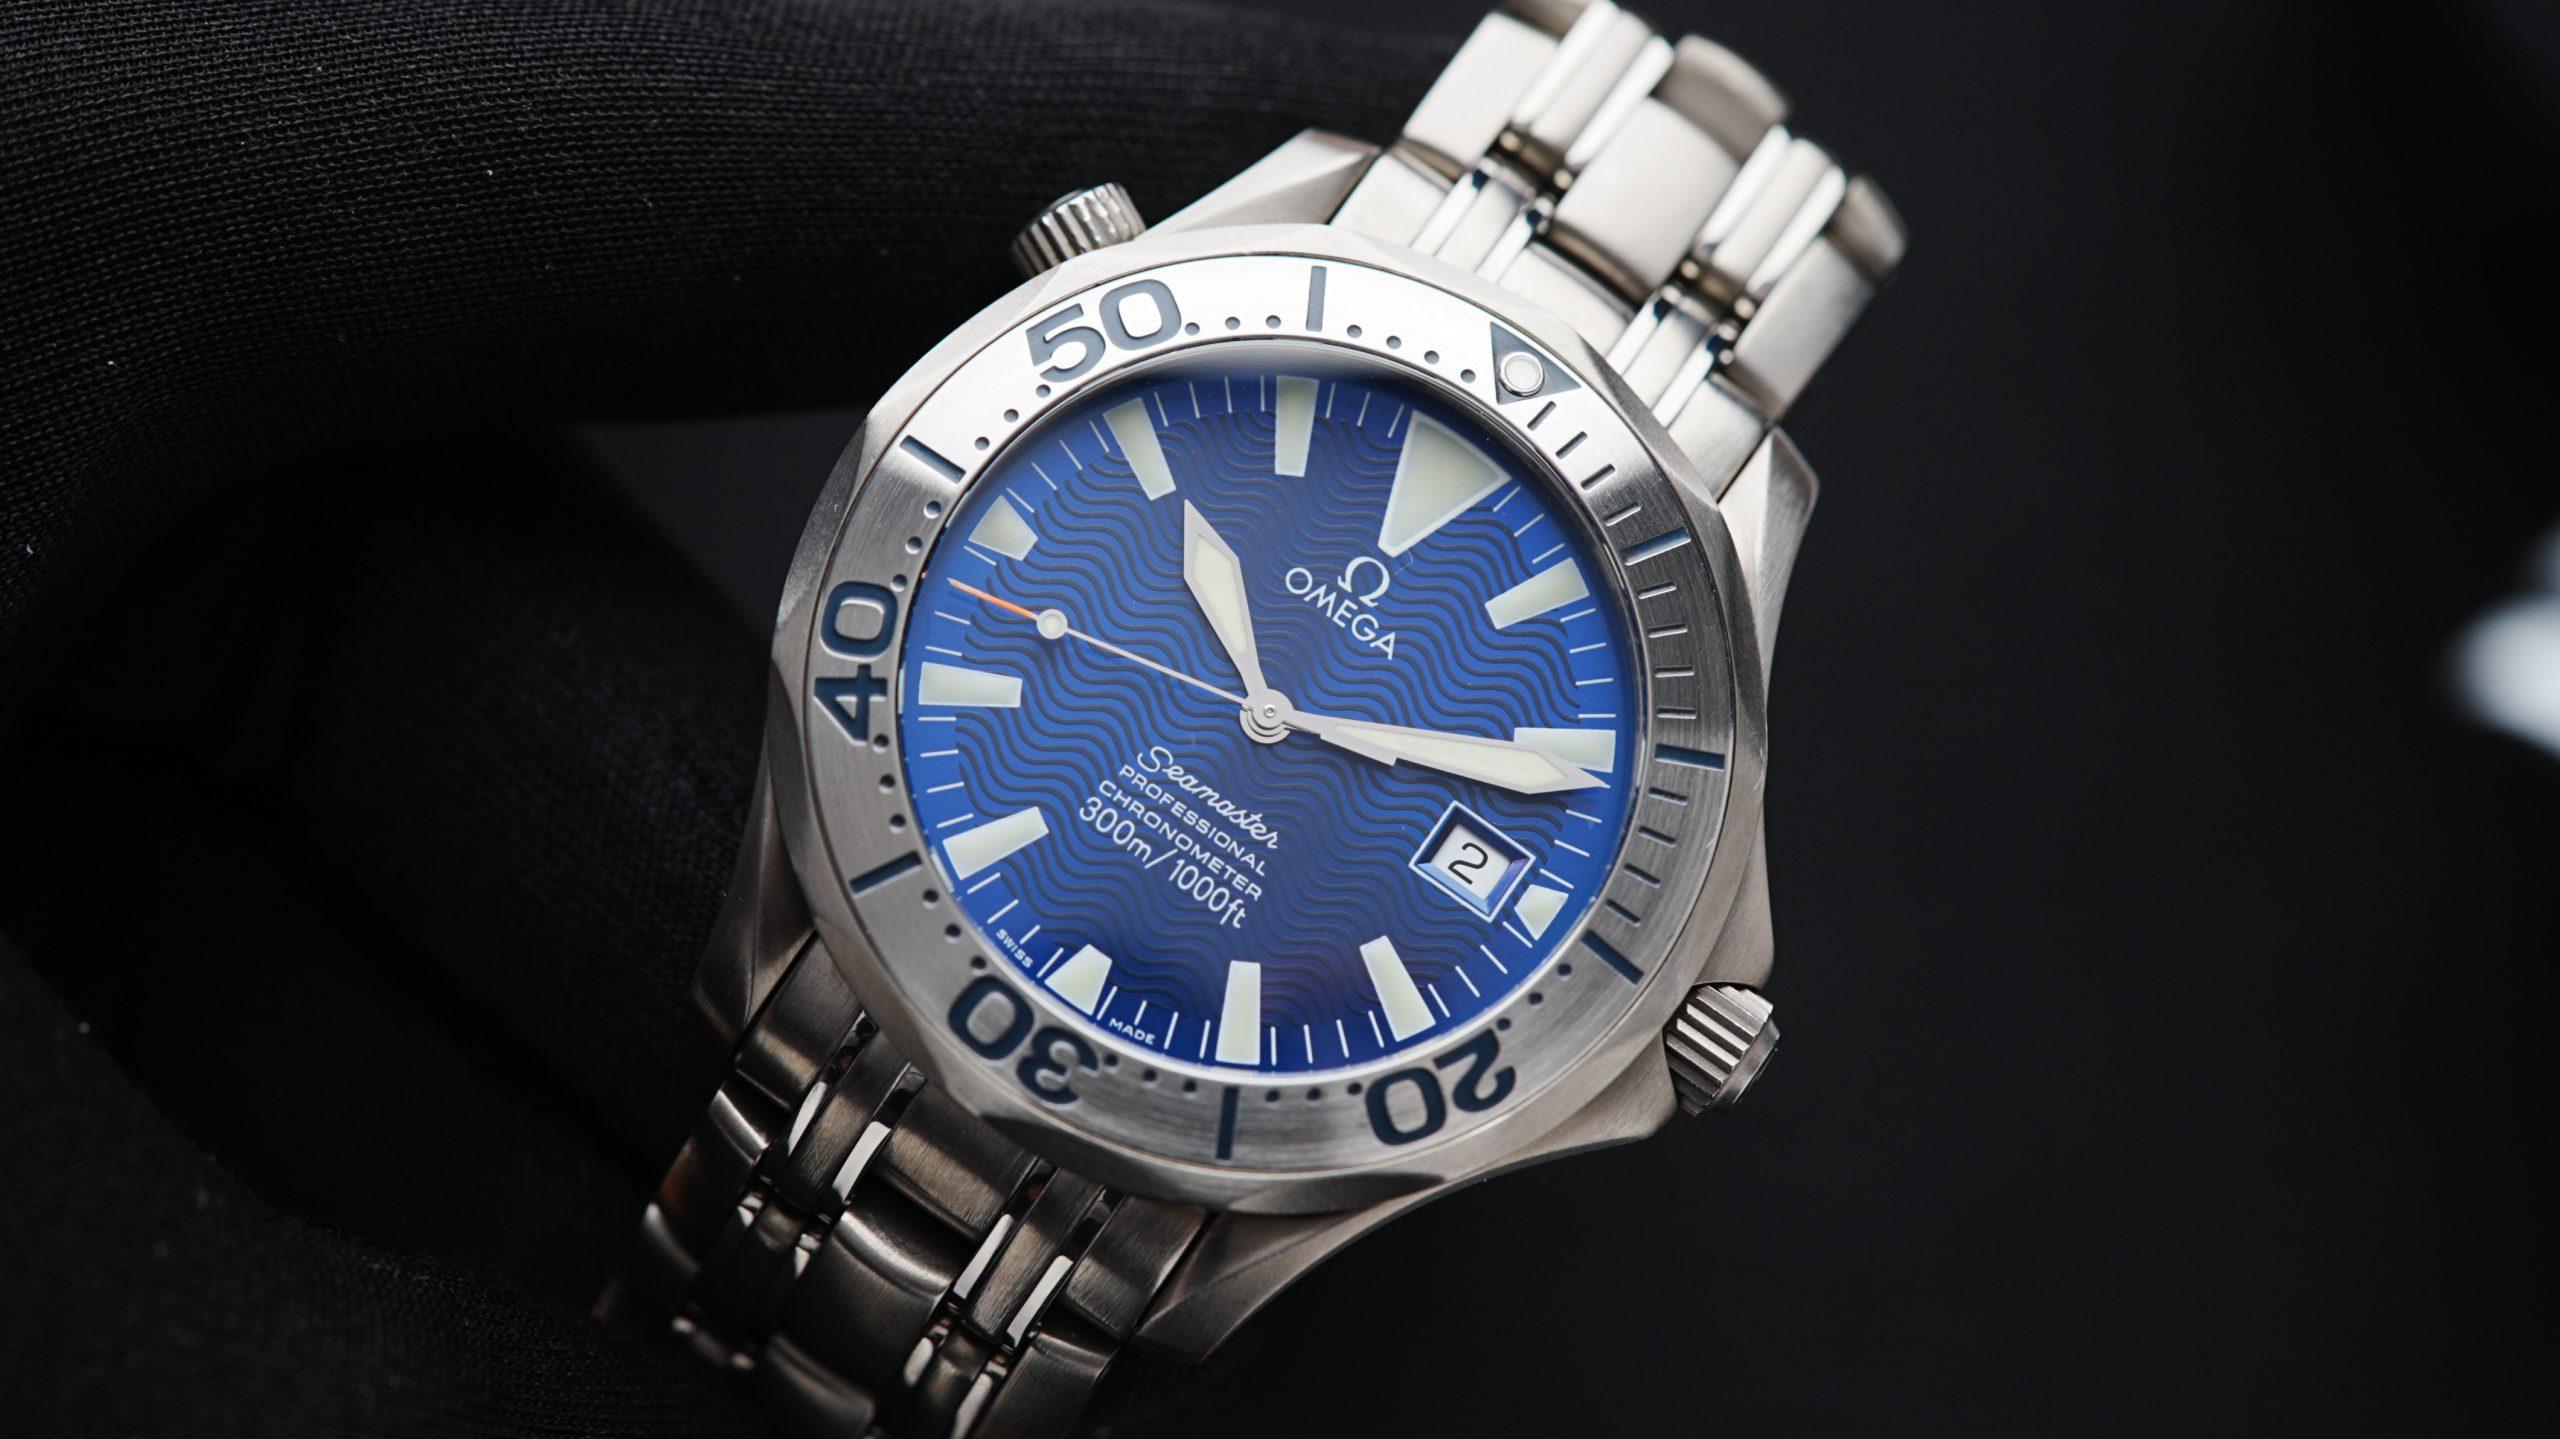 Omega Seamaster Professional 300m Electric Blue with Sword Hands up close of watch and dial.